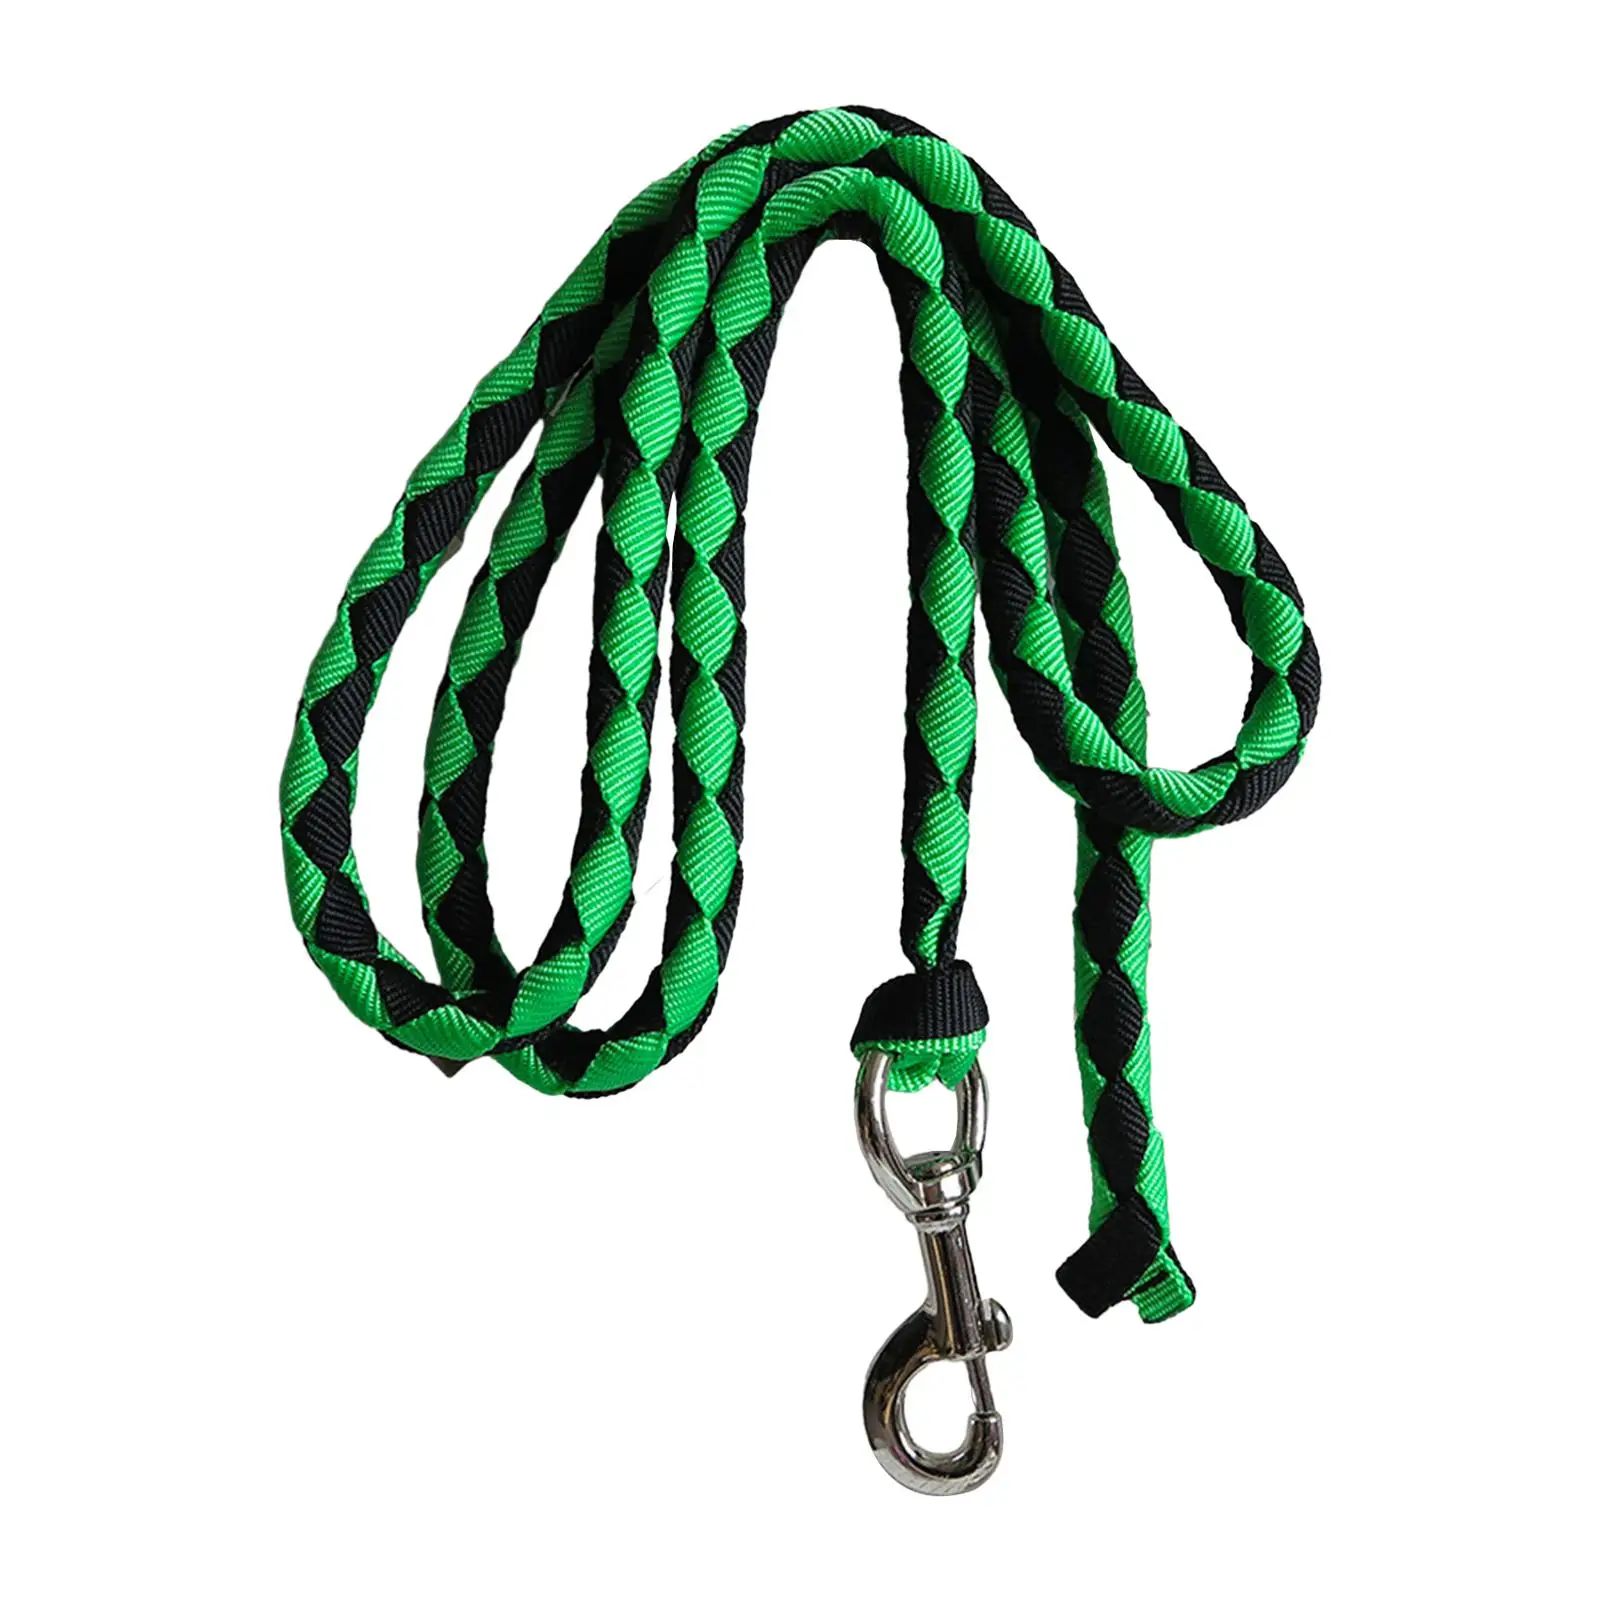 Horse Lead Rope Practical Horse Leads Durable Swivel Buckle for Pony, Donkey,